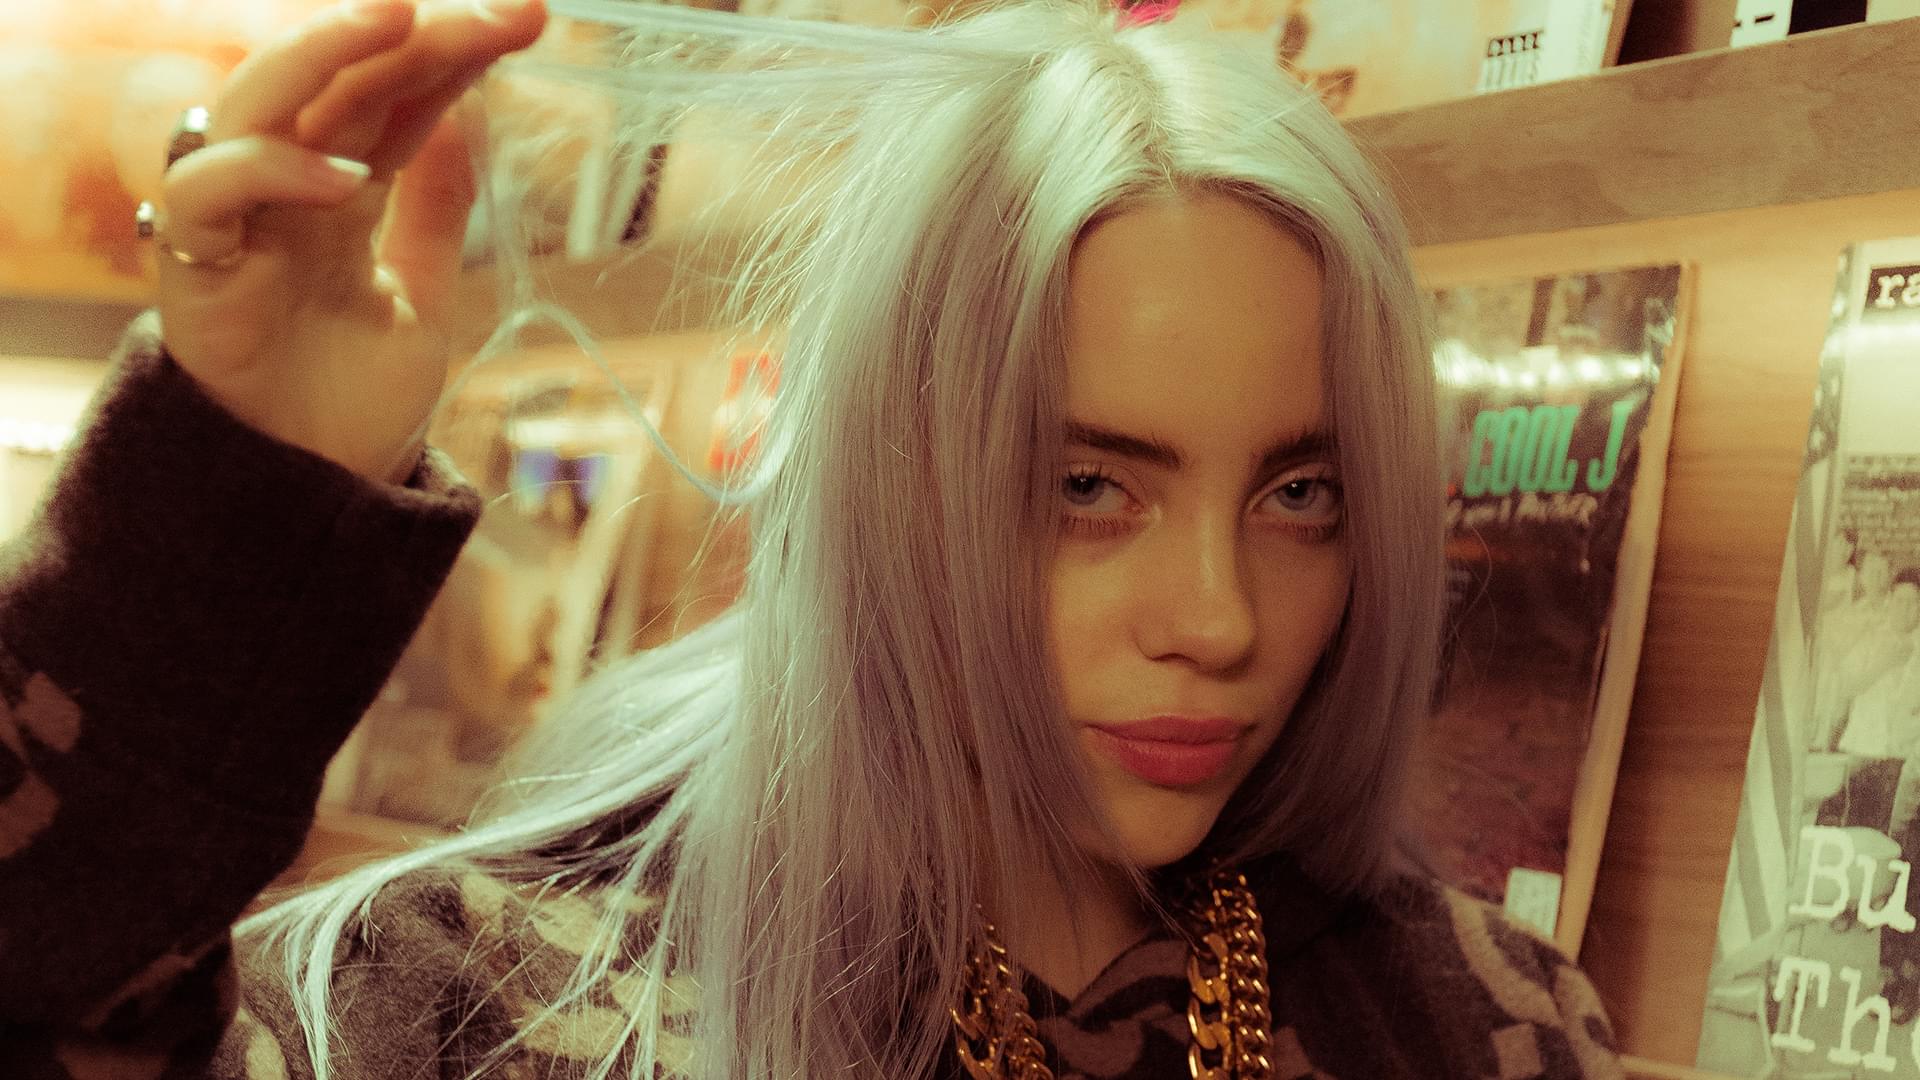 Billie Eilish Talks About Loving Meme Able Artists, Her Songwriting